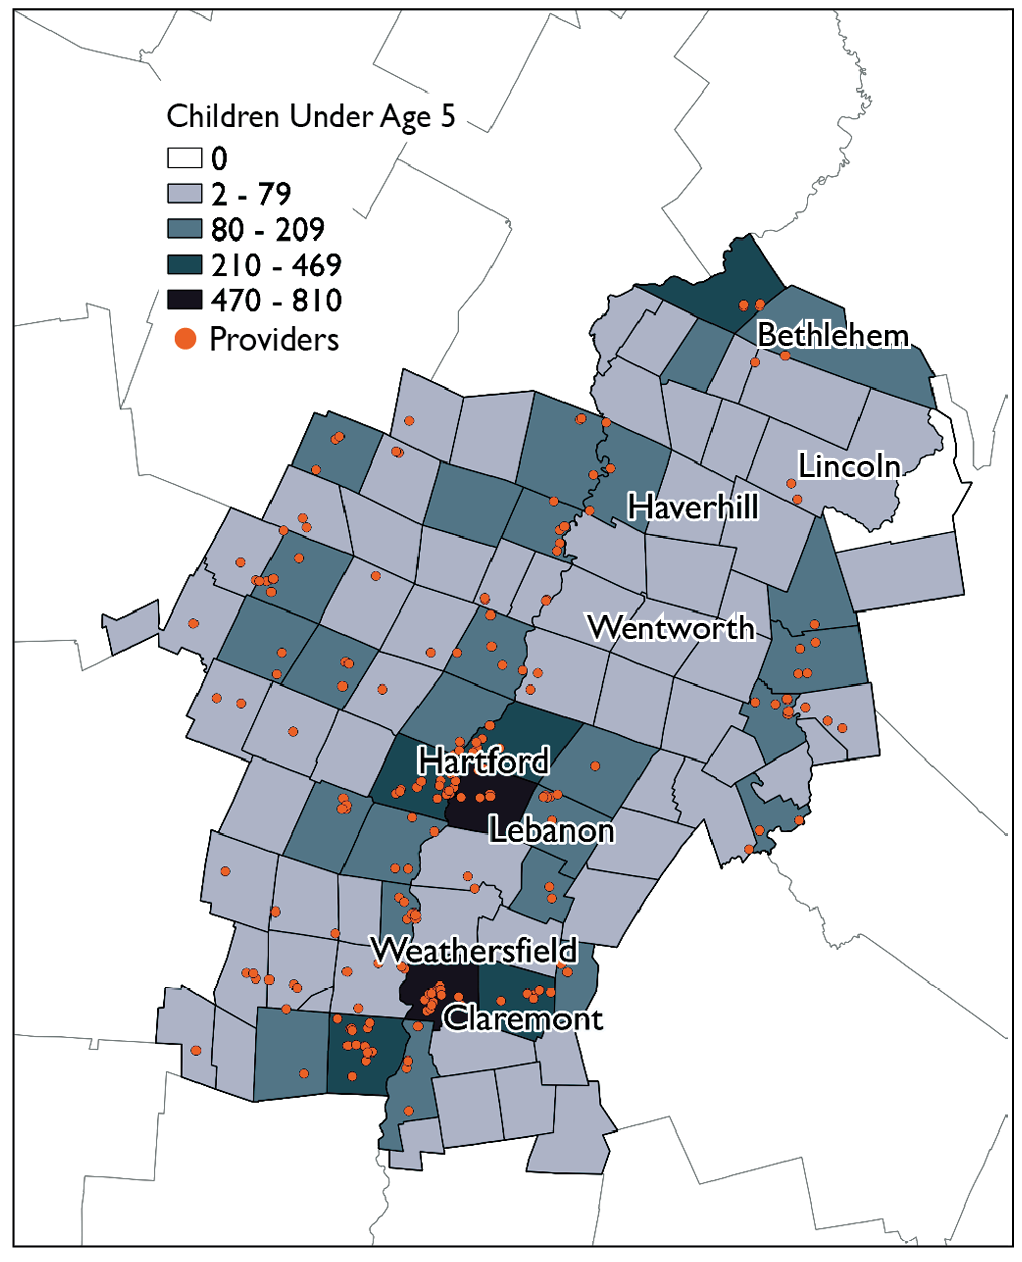 Figure 2. Regional map of Upper Valley child care providers and distribution of children under age 5. 